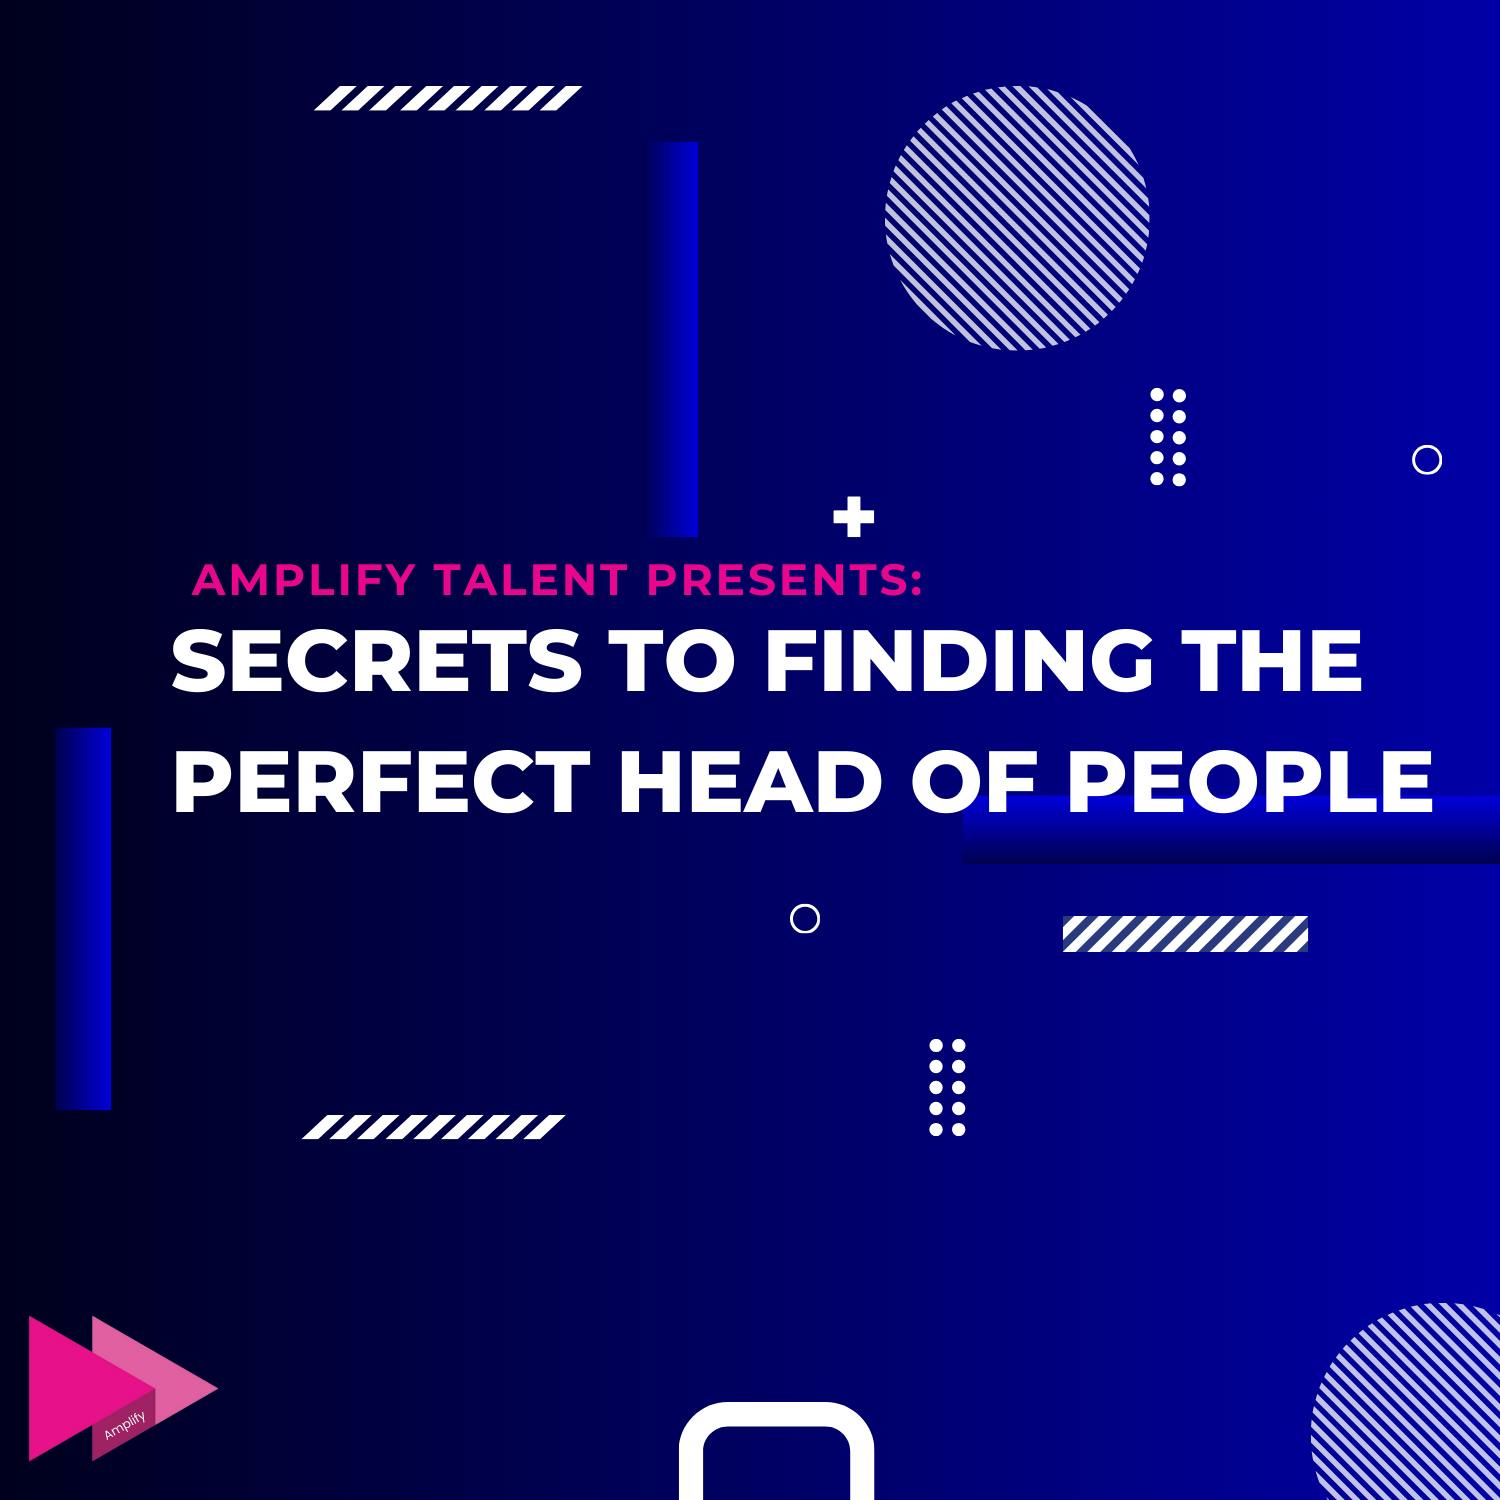 The Secrets to Hiring the Perfect Head of People